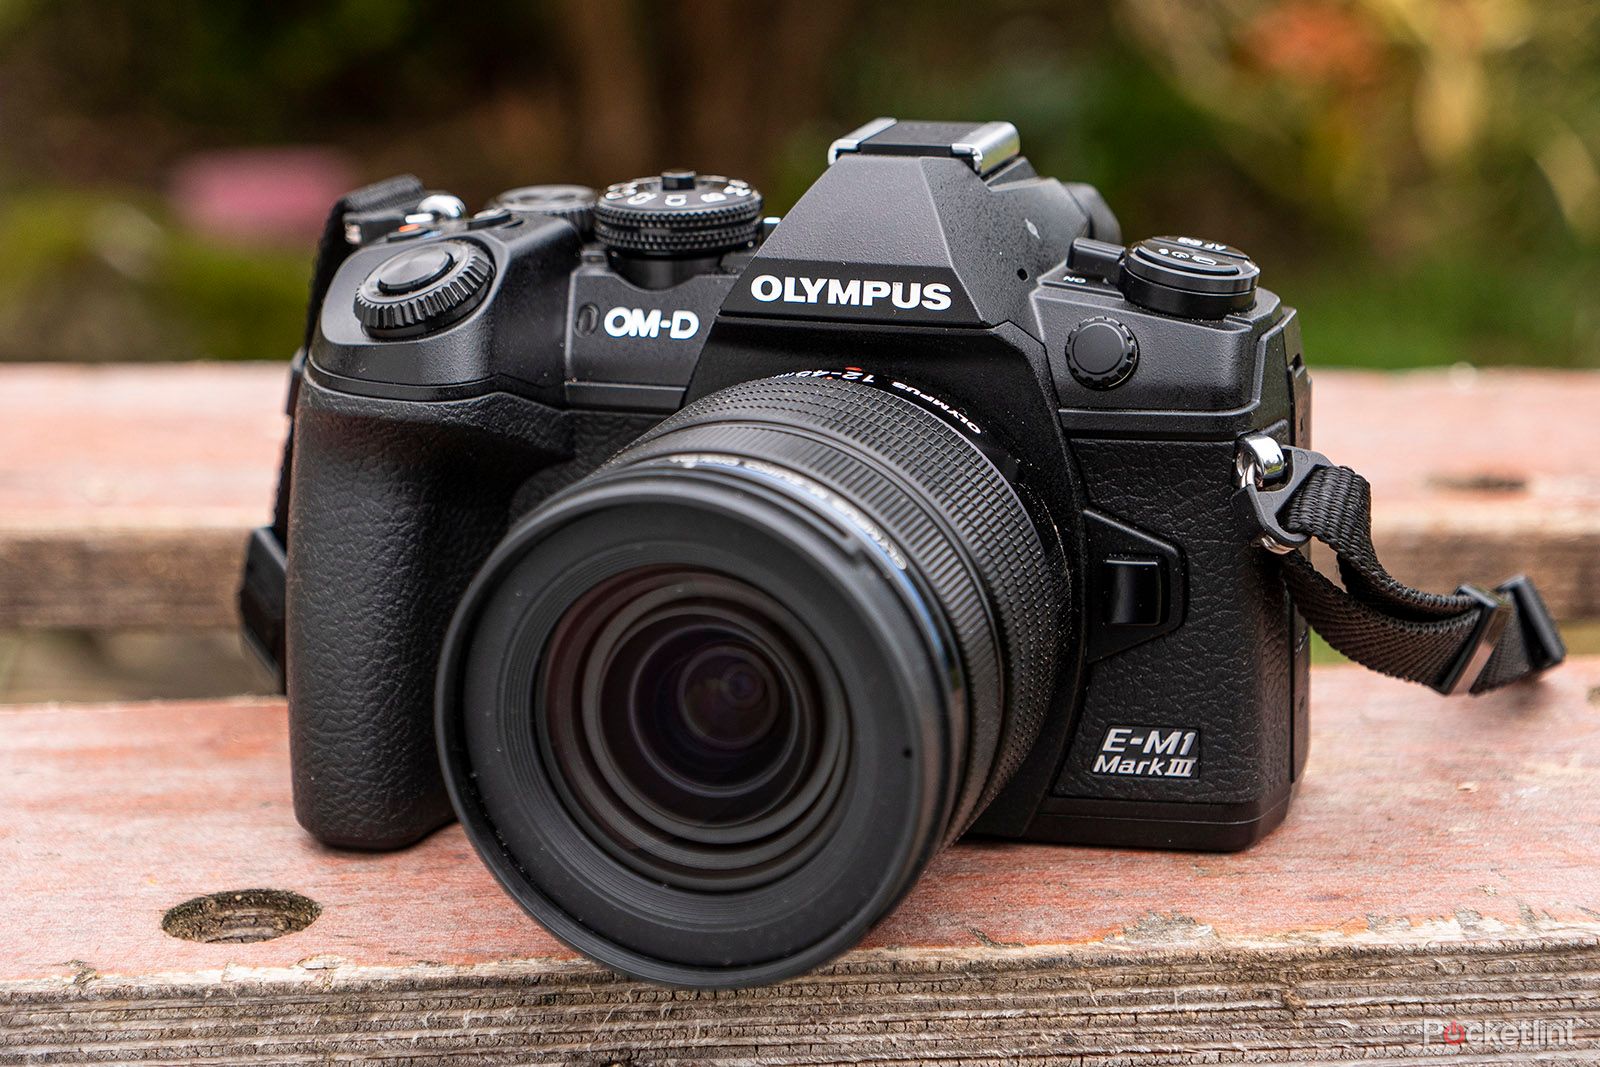 Olympus OM-D E-M1 Mk3 review: Technological powerhouse